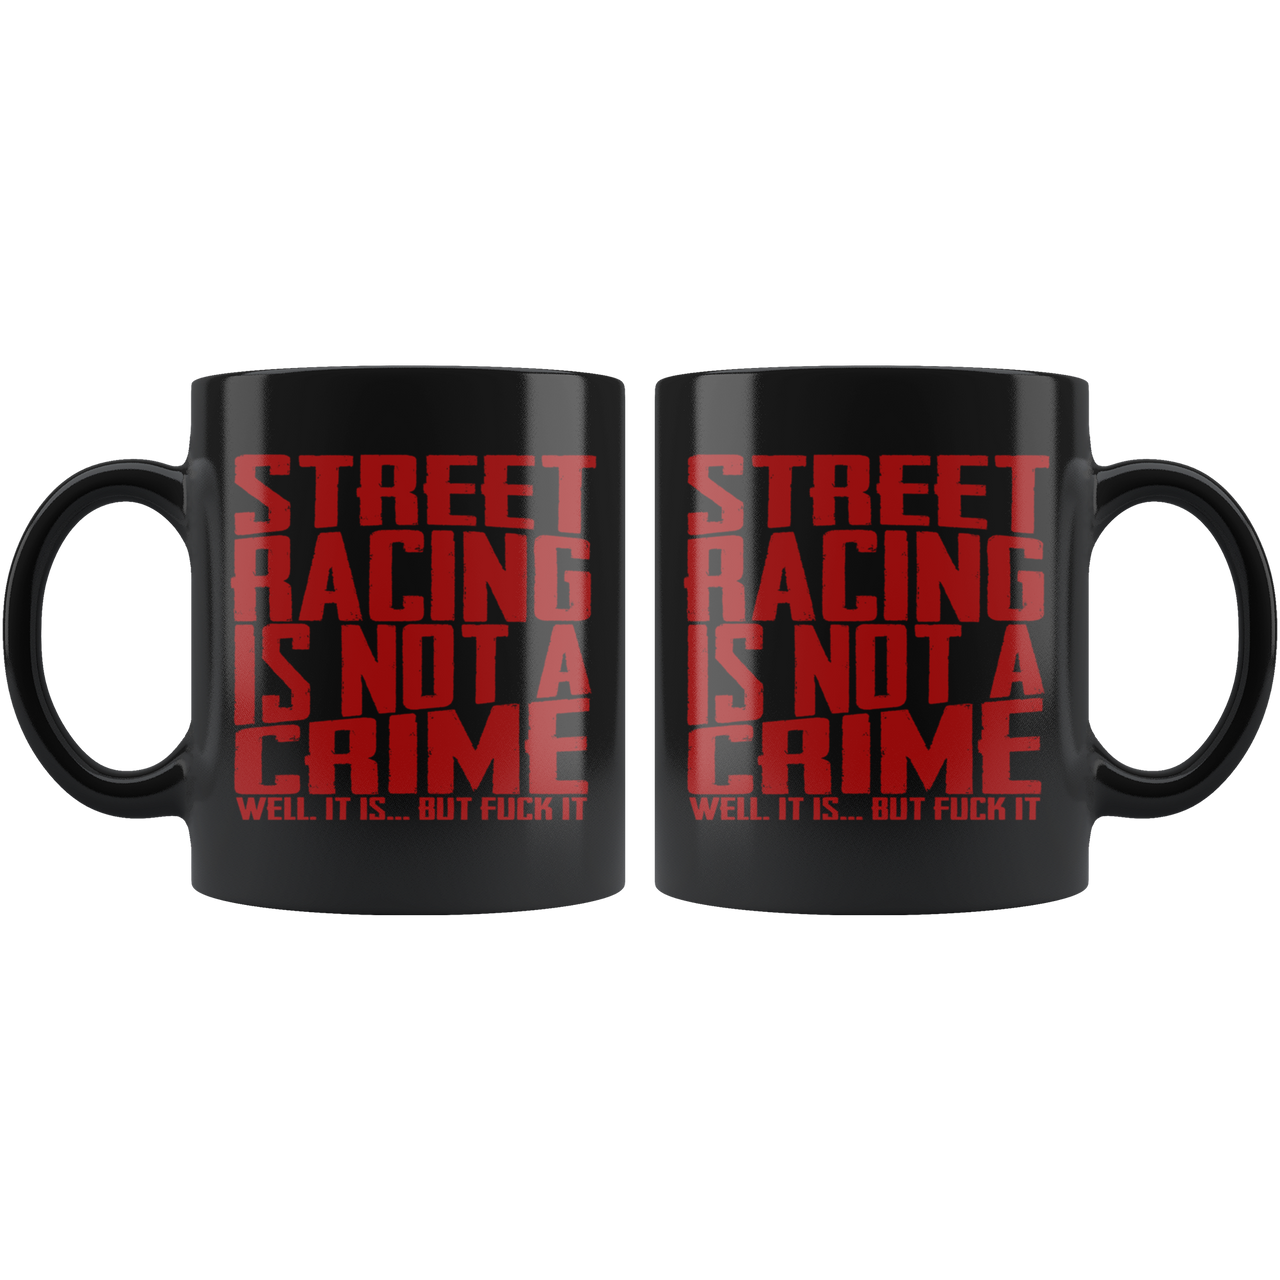 Street Racing Is Not A Crime Well it Is But Screw It RedV Mug!